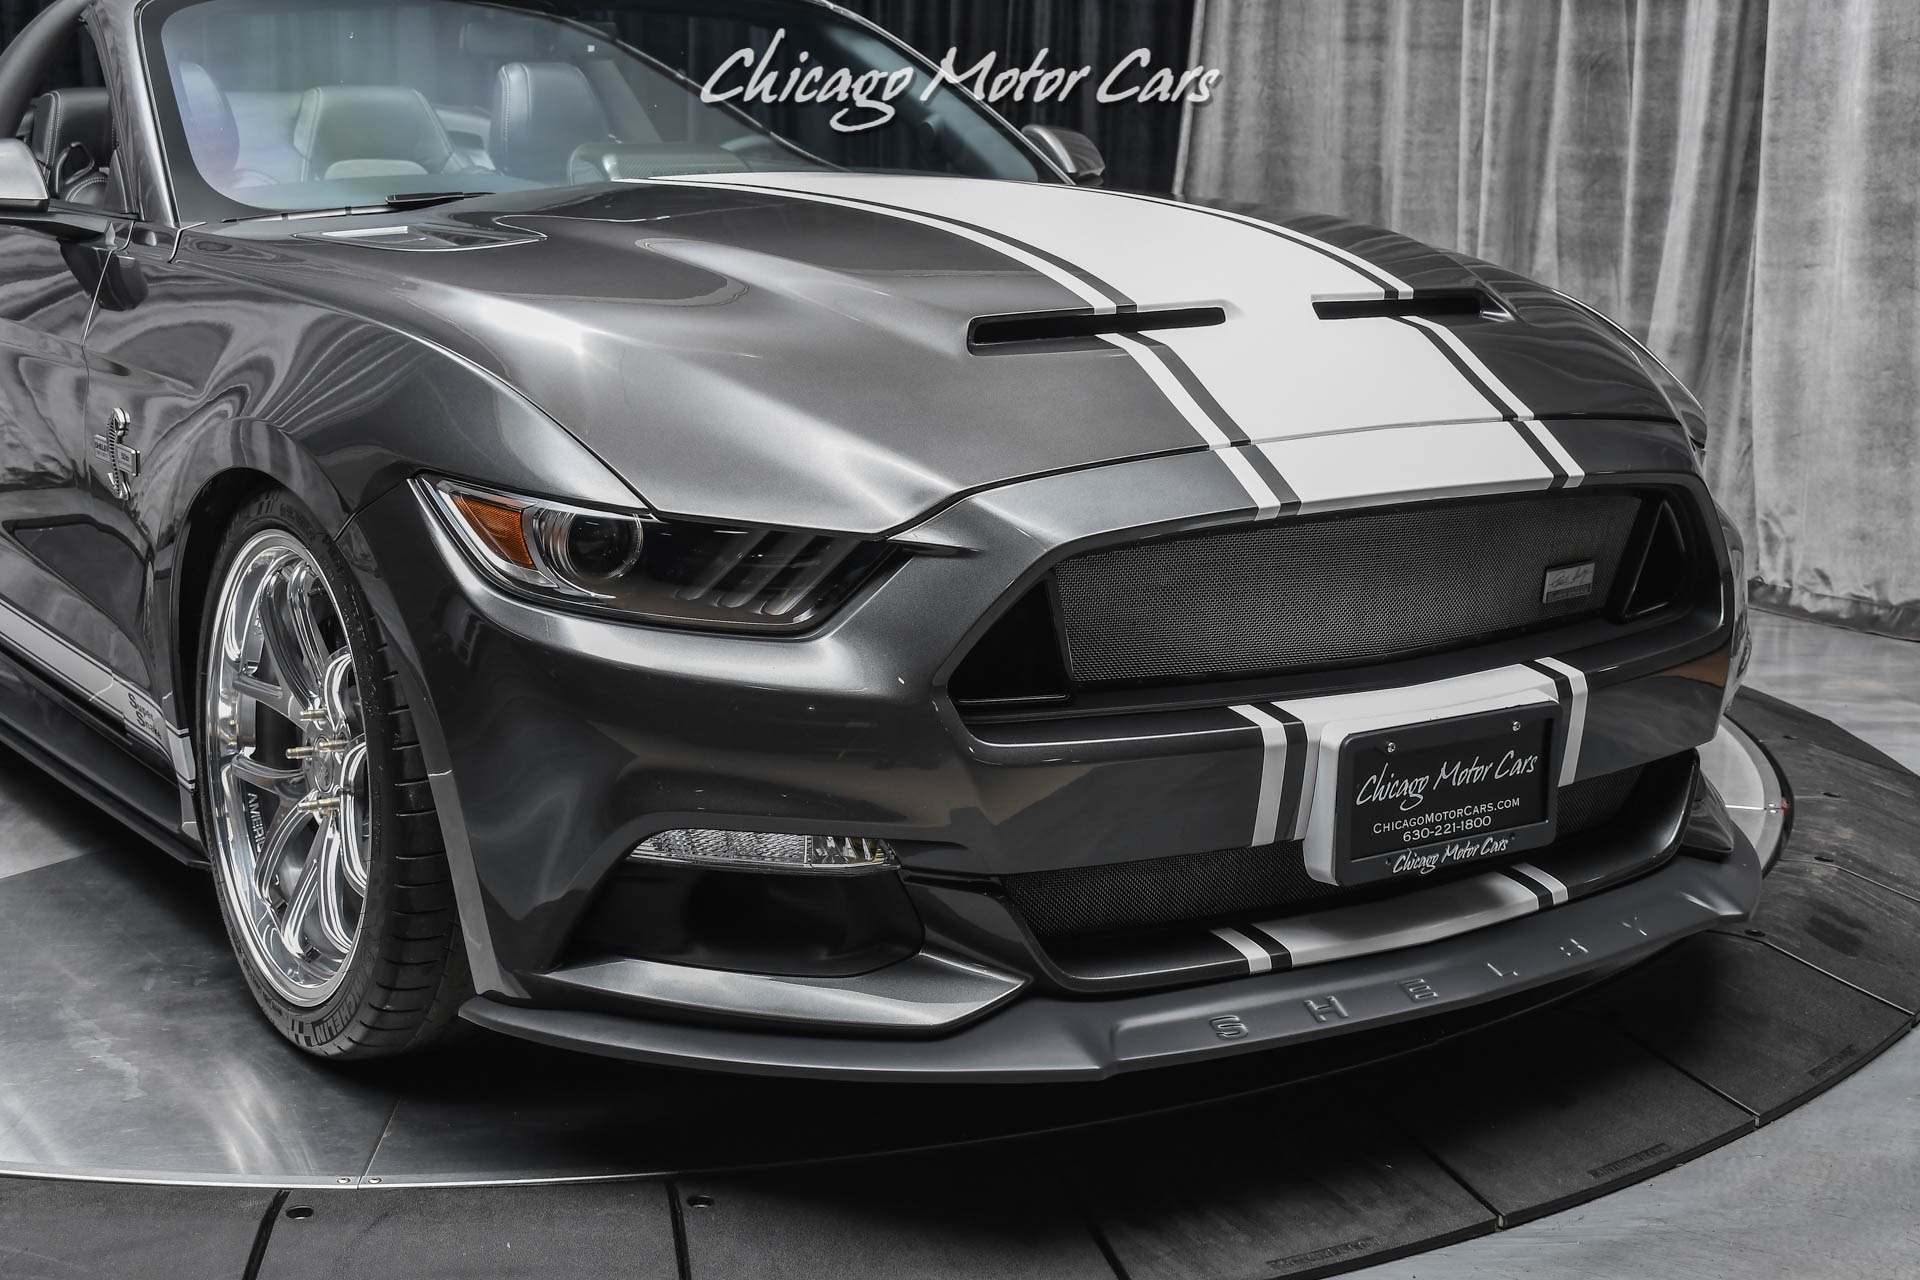 Used-2017-Ford-Mustang-Shelby-SuperSnake-Supercharged-750-Horsepower